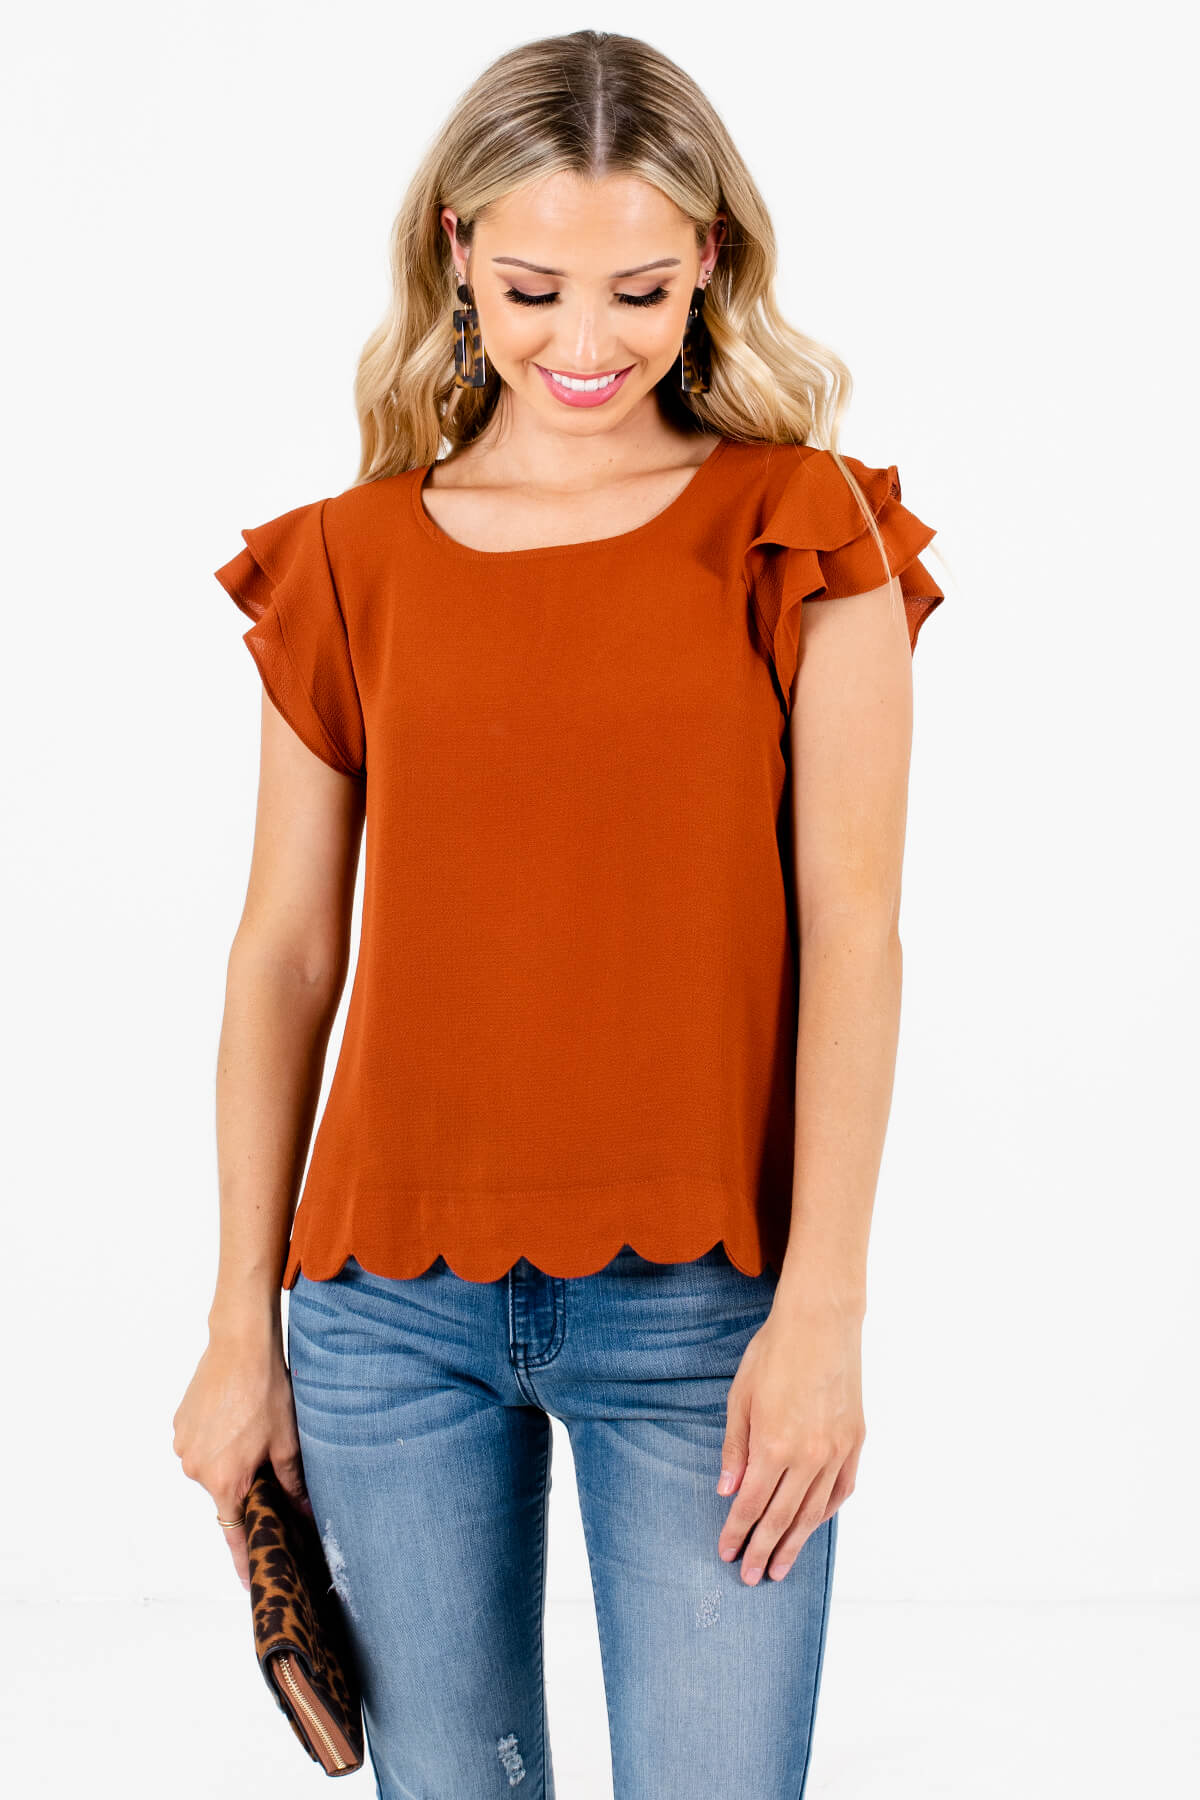 Rust Orange Lightweight Textured Material Boutique Blouses for Women